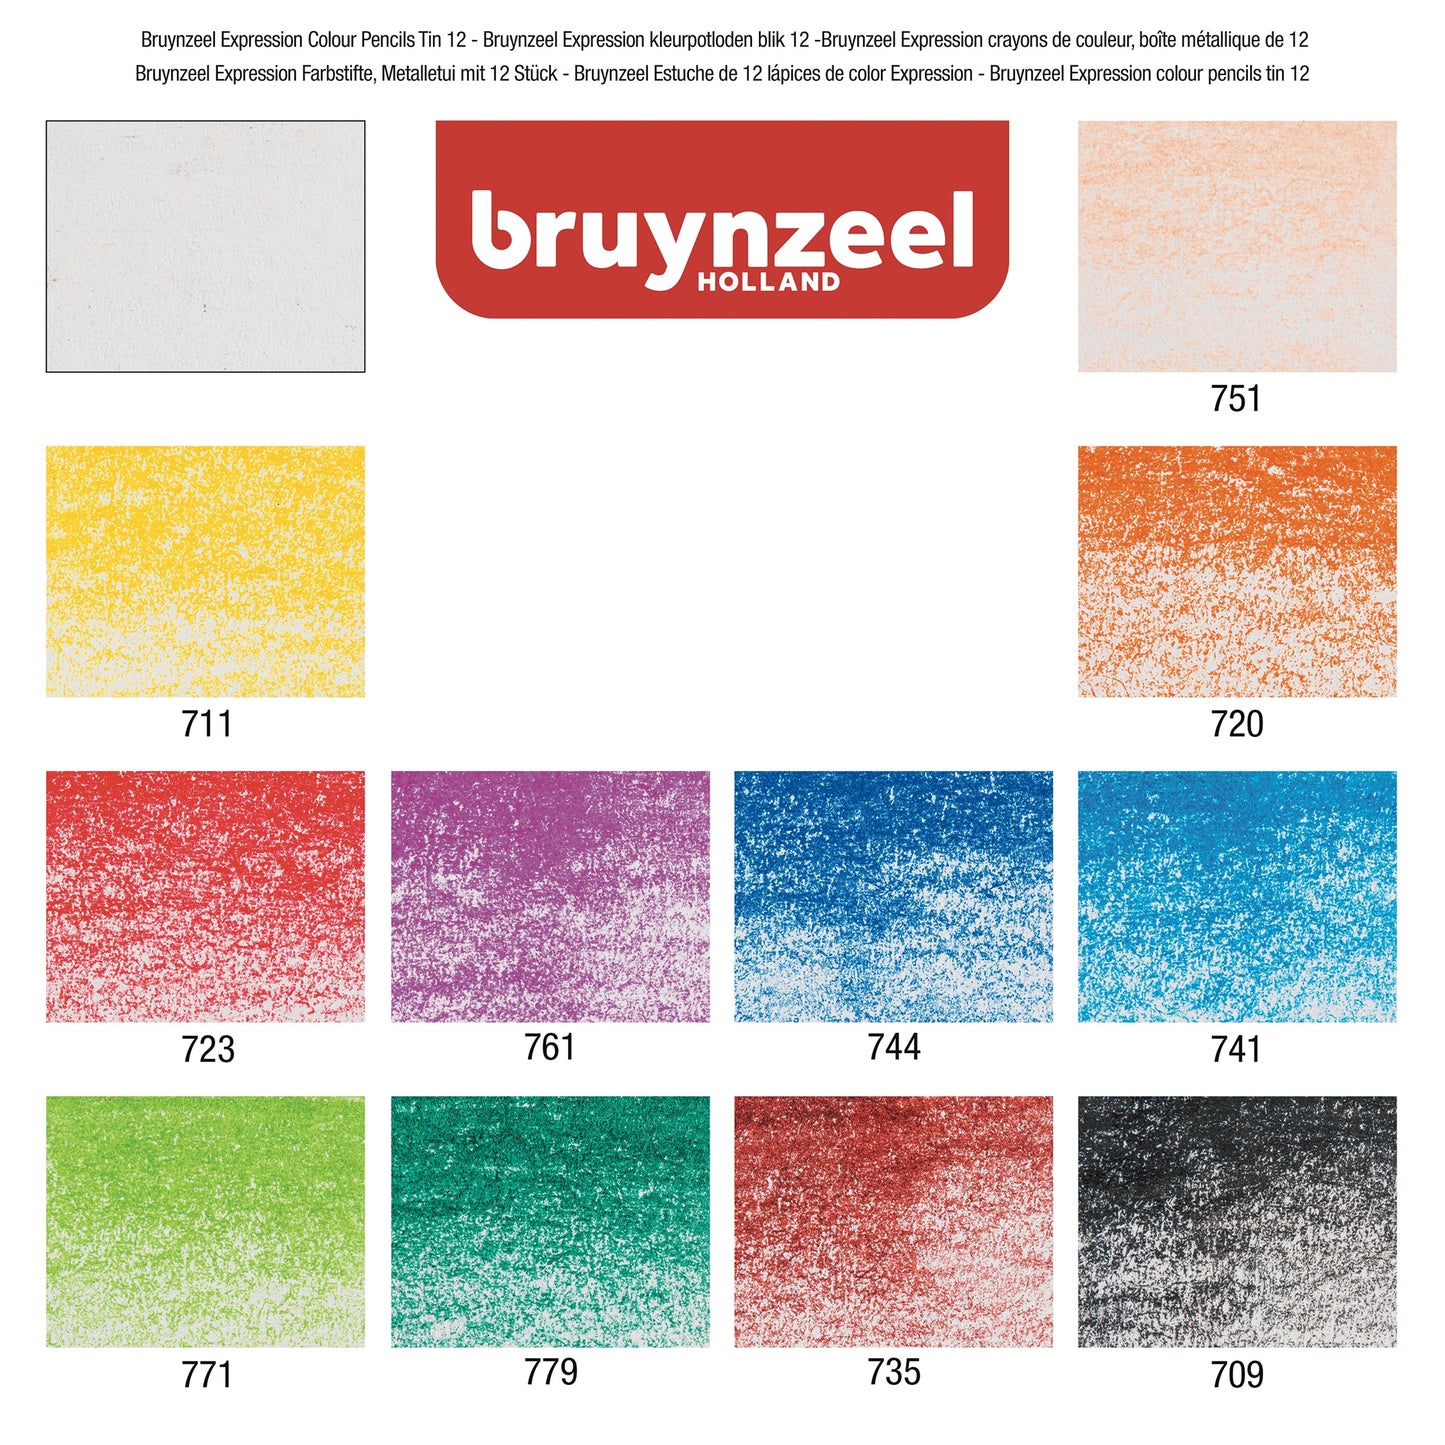 Bruynzeel expression 12 colour pencils tin swatches - Paper Dream